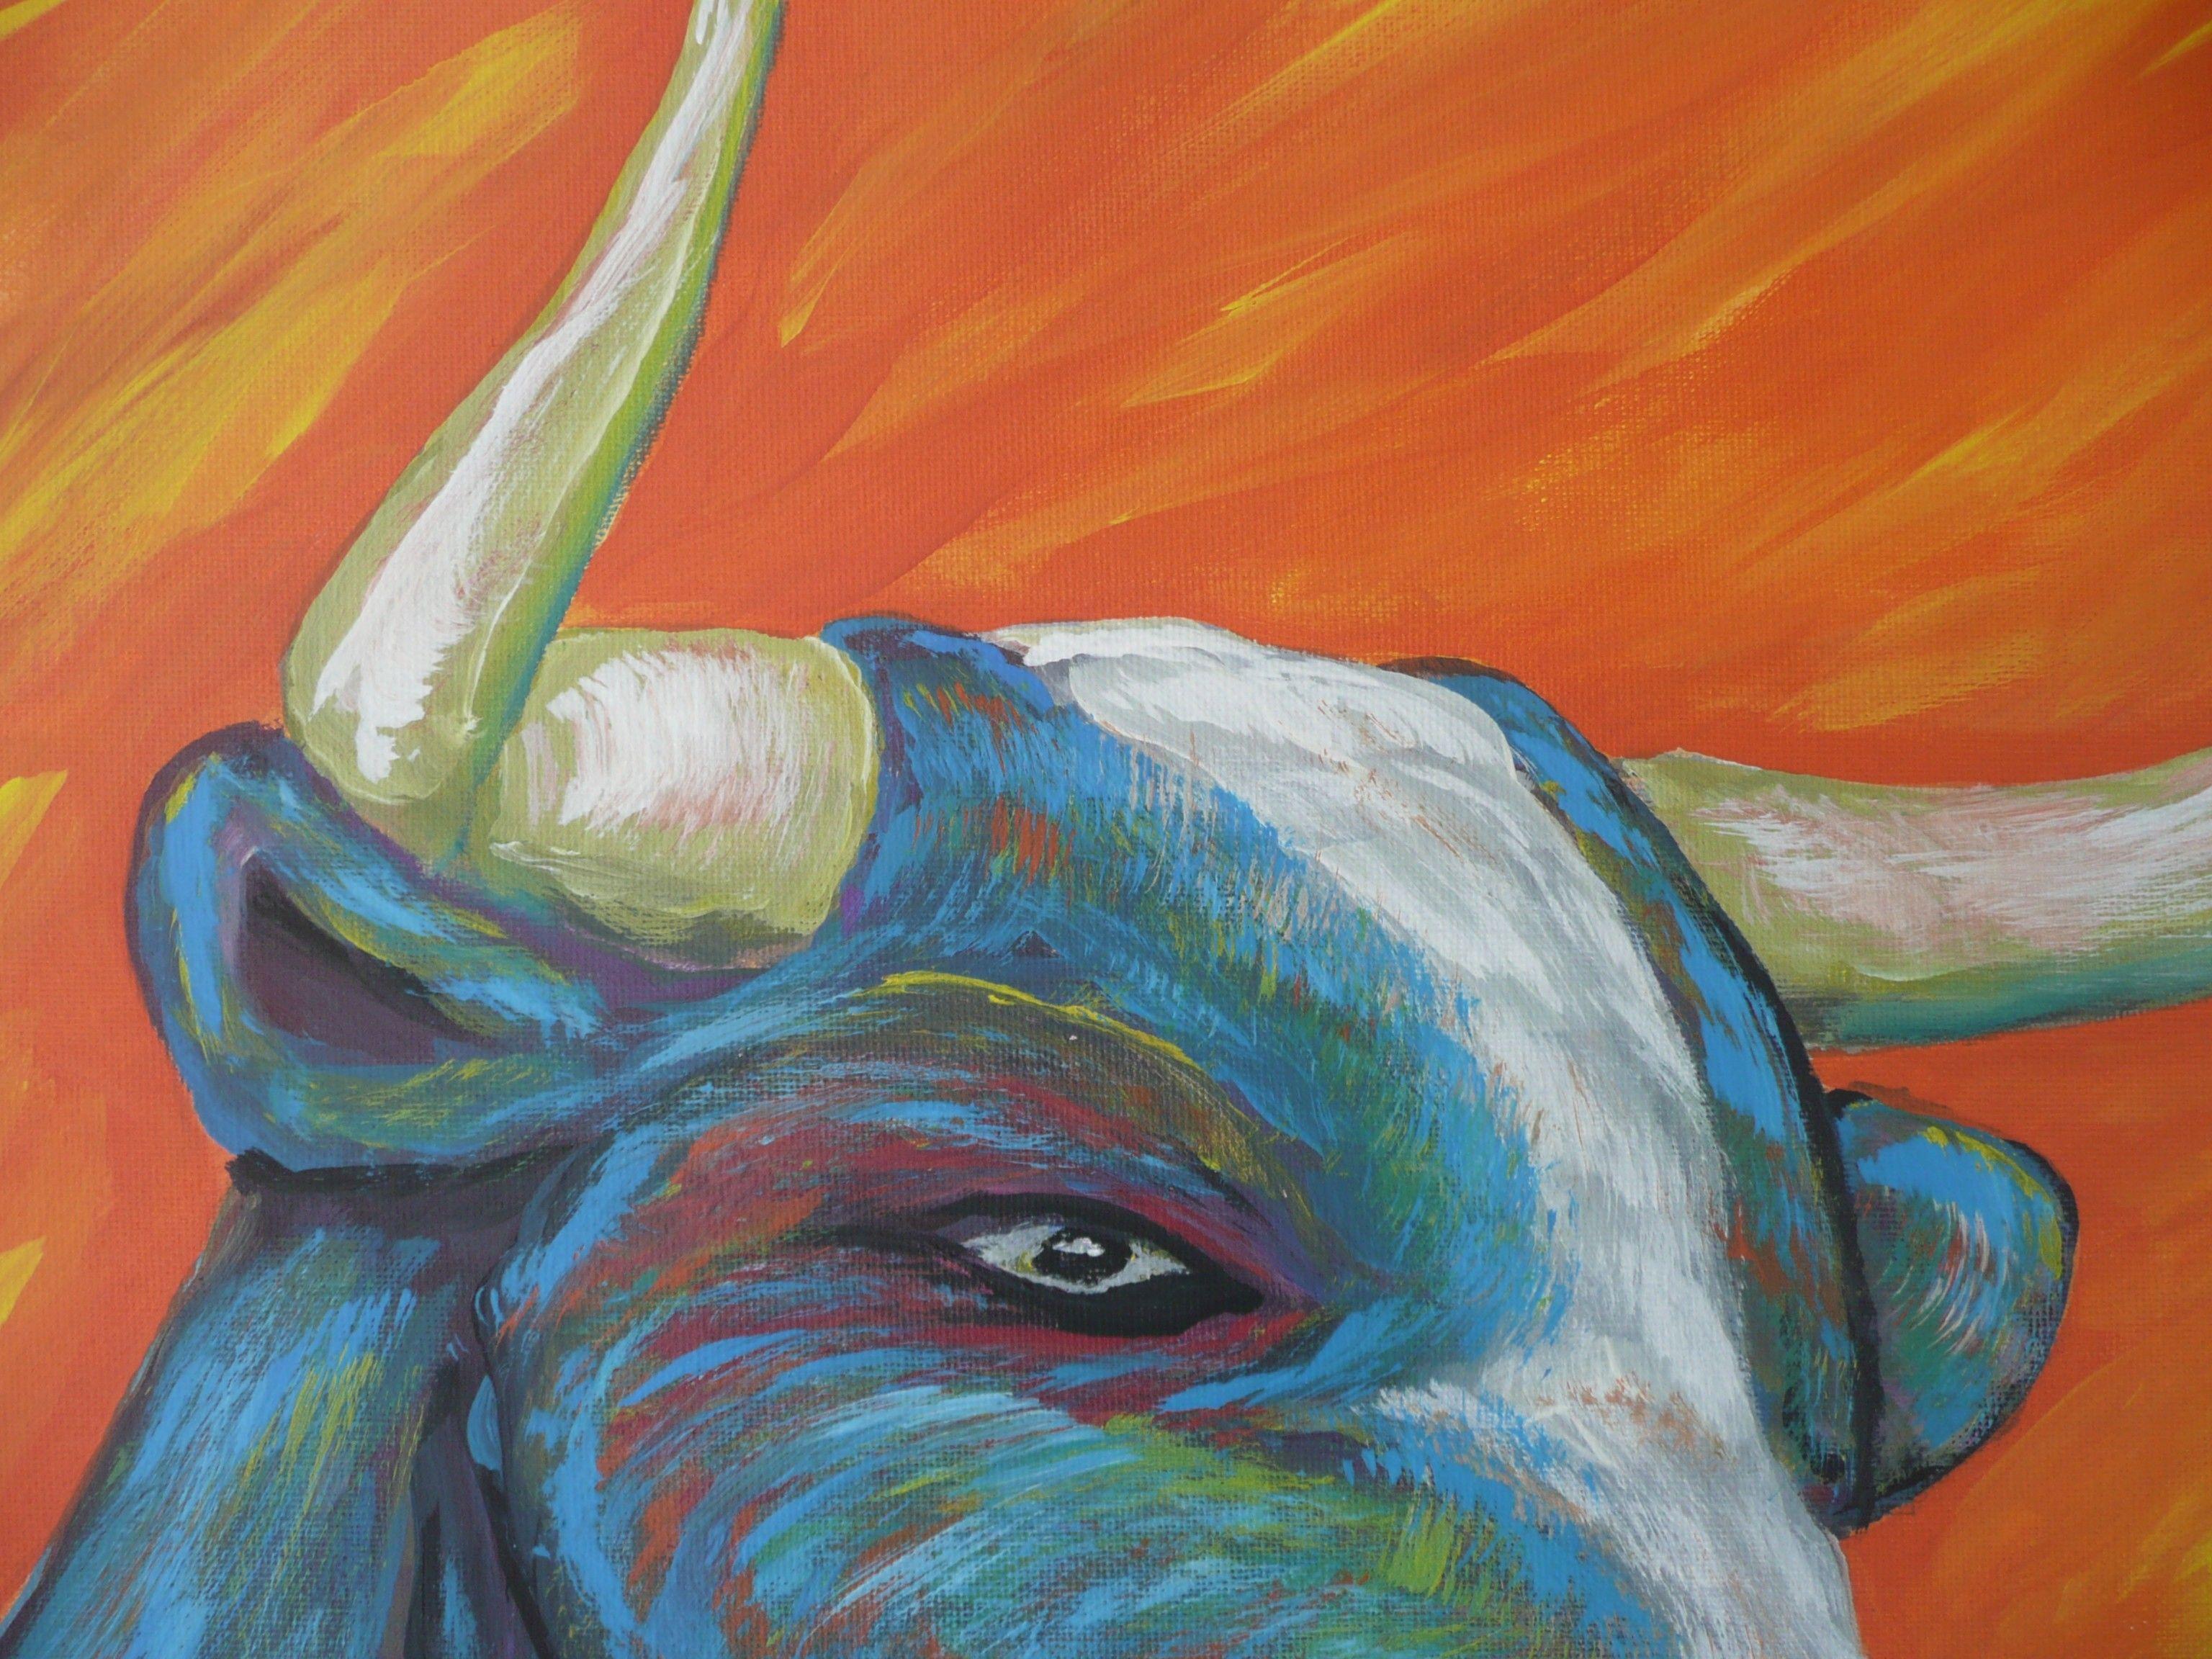 This is a bull. I have chosen to paint this fine animal in a variety of colors to show the power of the beast as it roams the desert. The style is free flowing and riotous coloring. This painting has been created using only professional grade